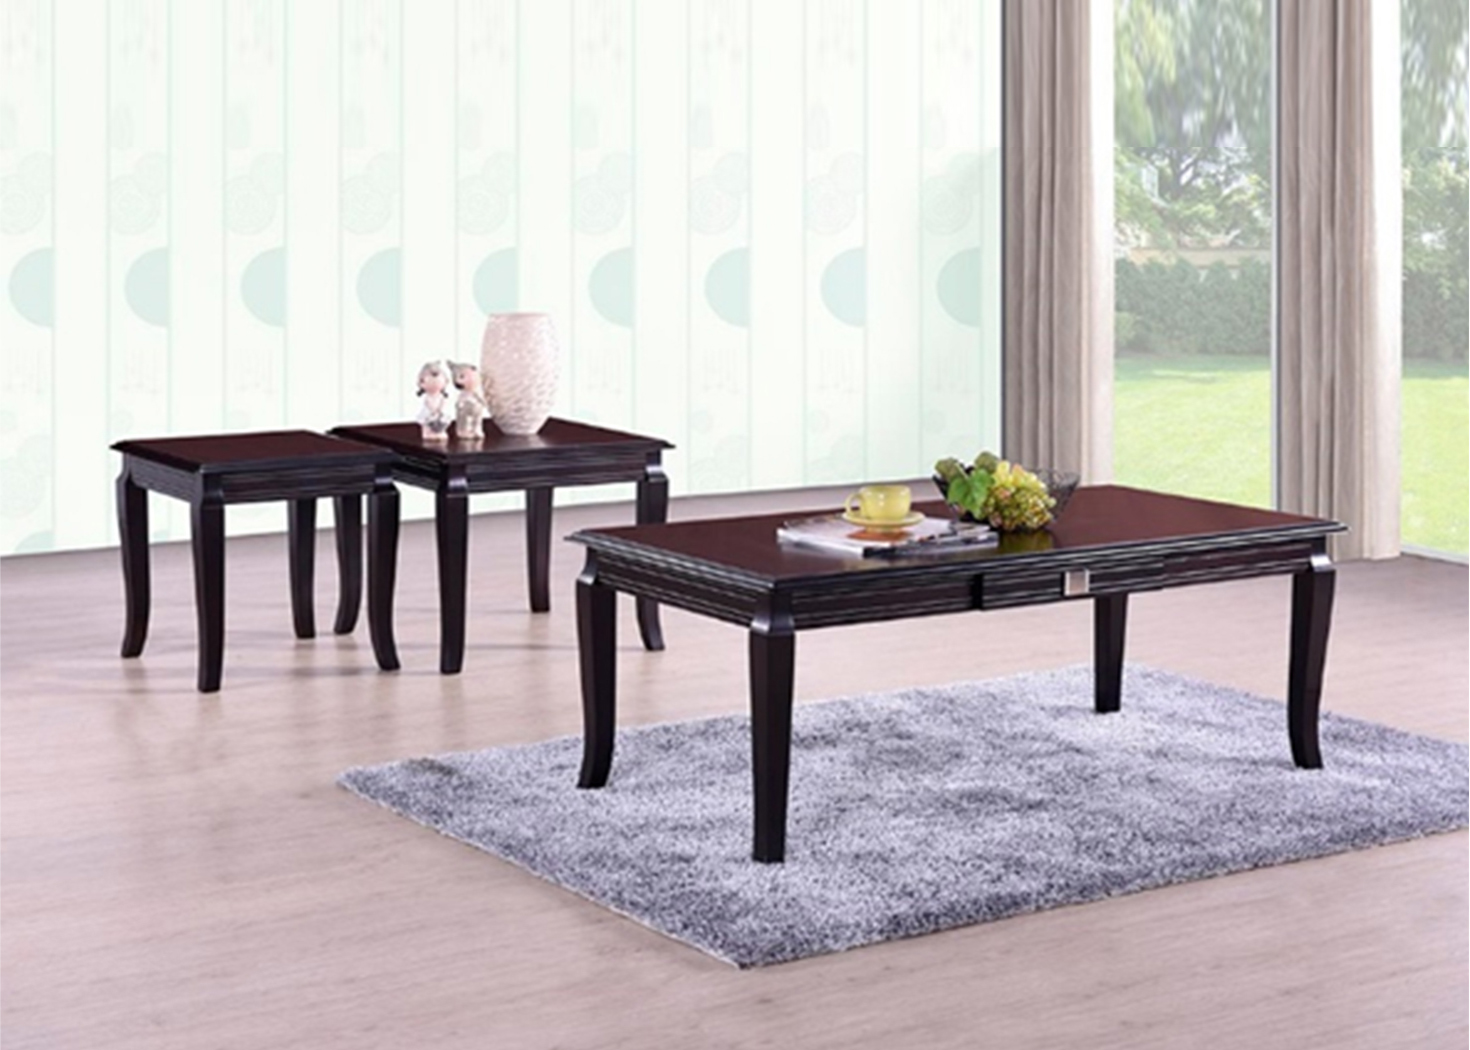 The Arabica Coffee Table on Sale